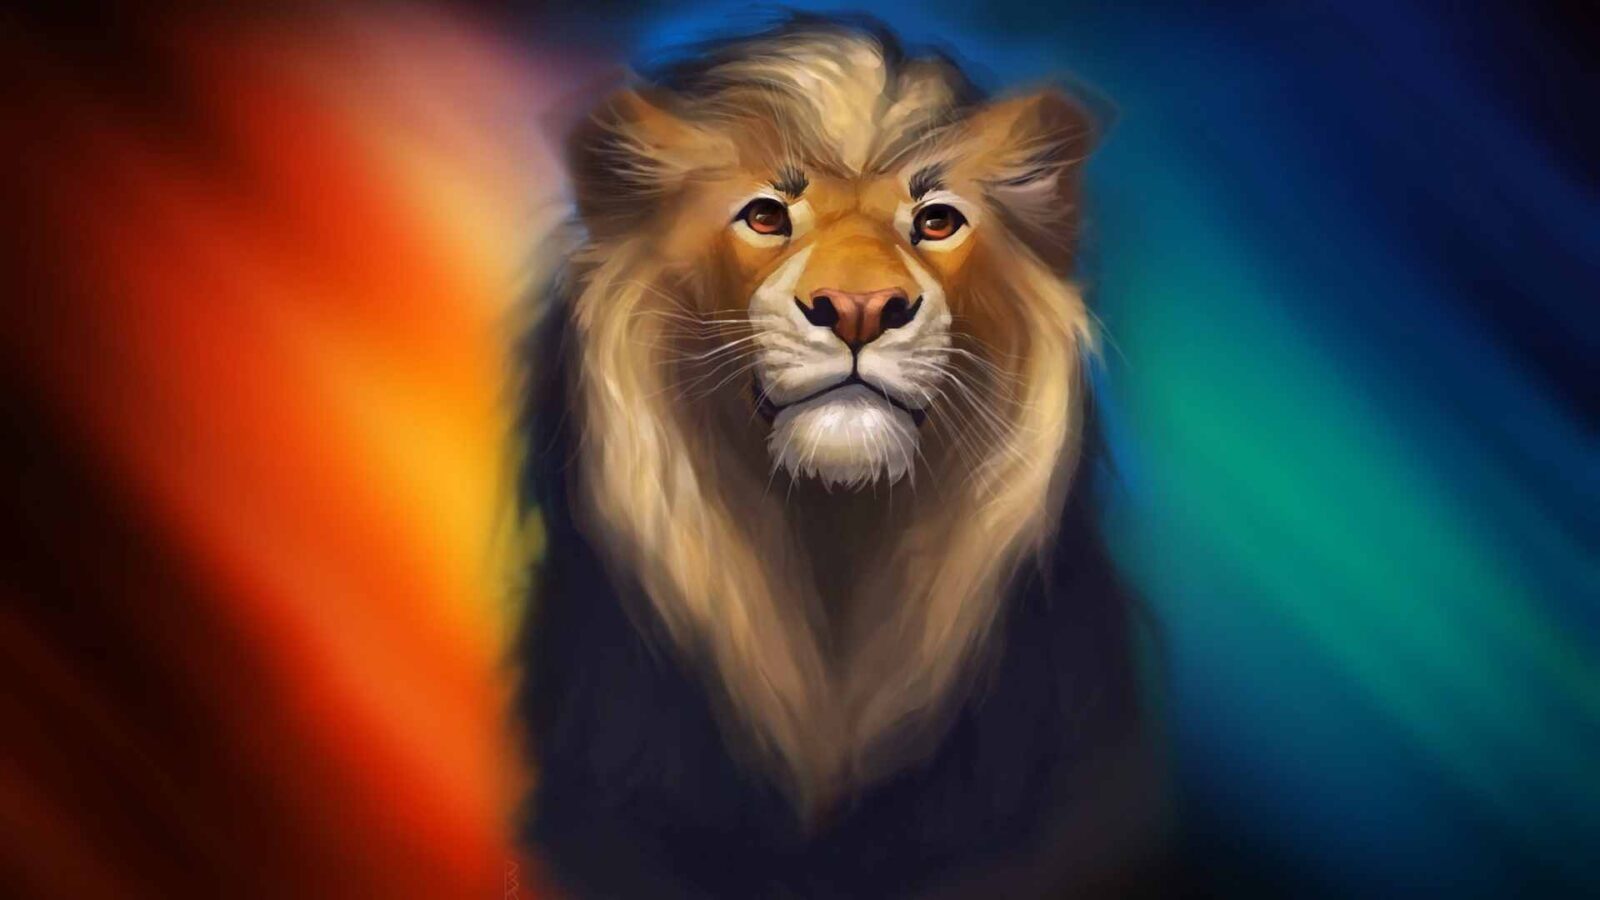 LiveWallpapers4Free.com | Wavy Lion In Colors ArtWork - Free Live Wallpaper